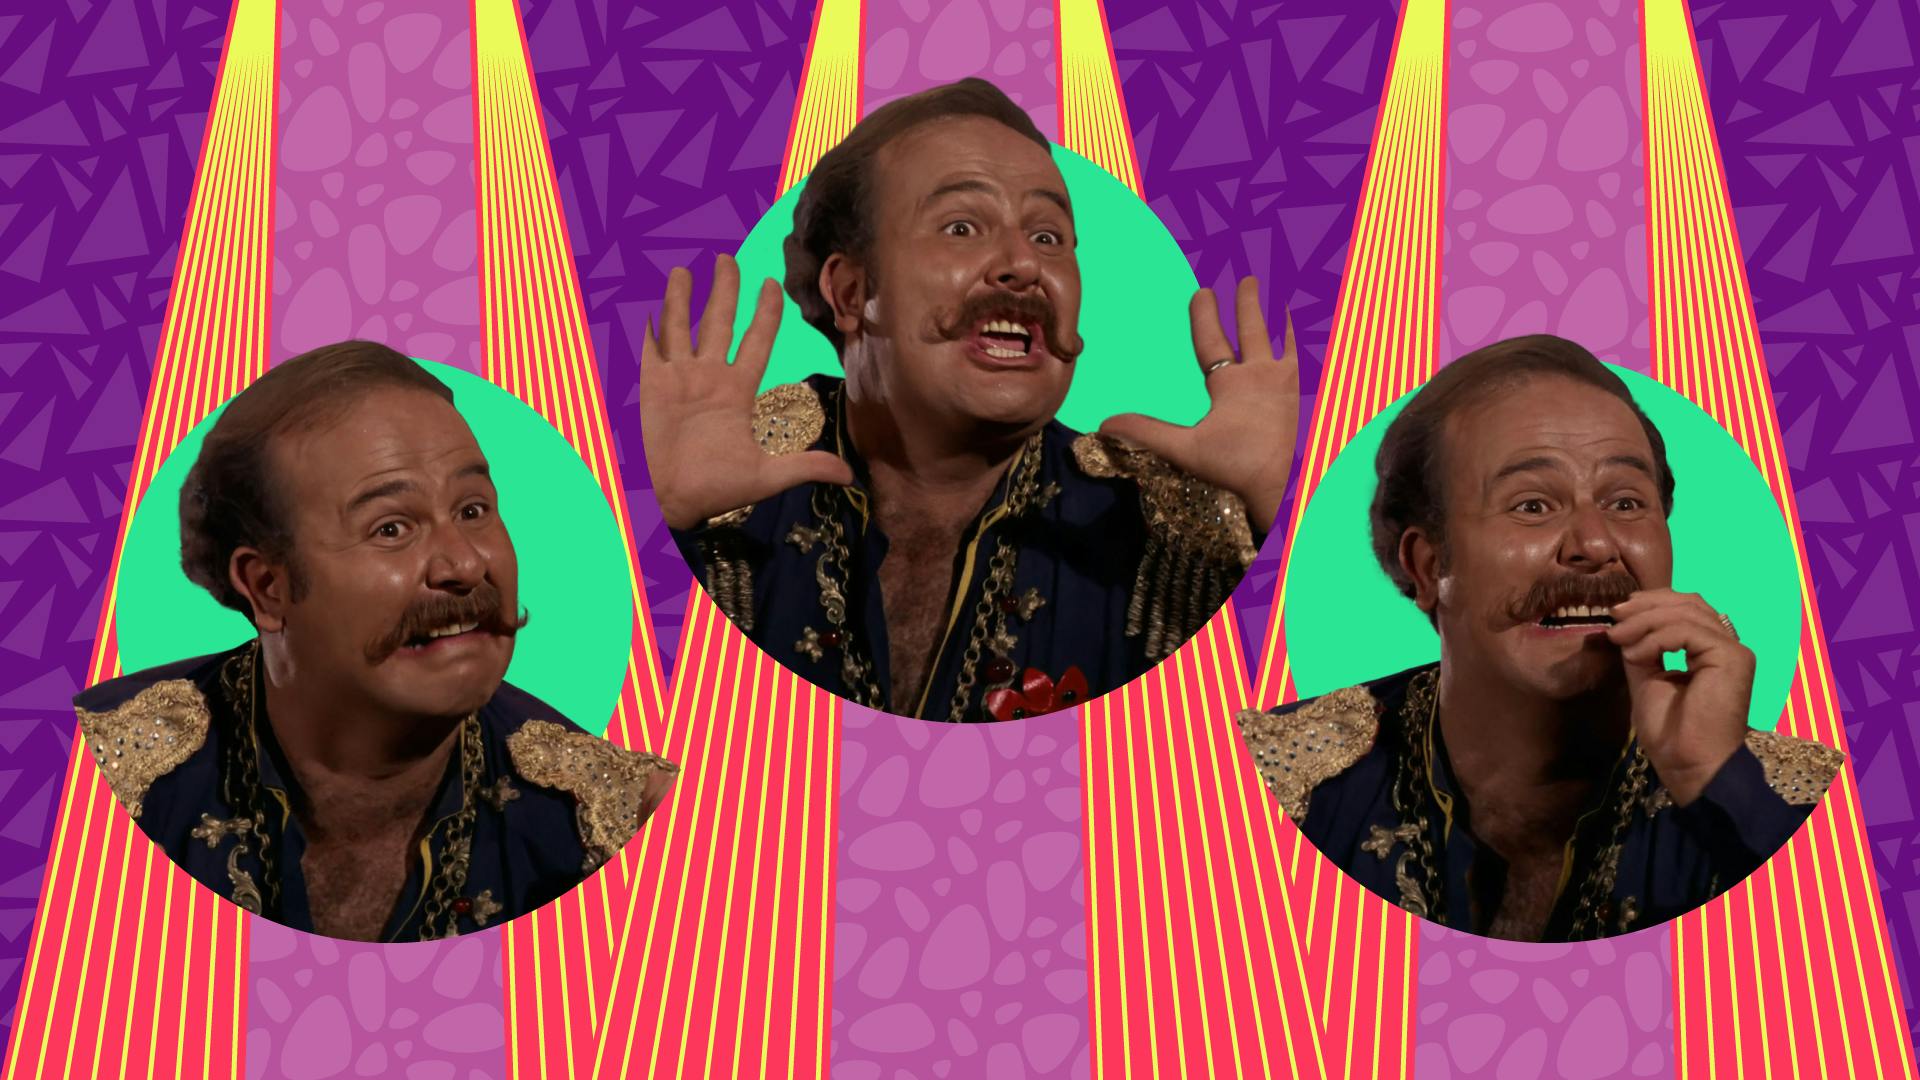 Illustrated graphic featuring three over-the-top facial expressions from Harry Mudd